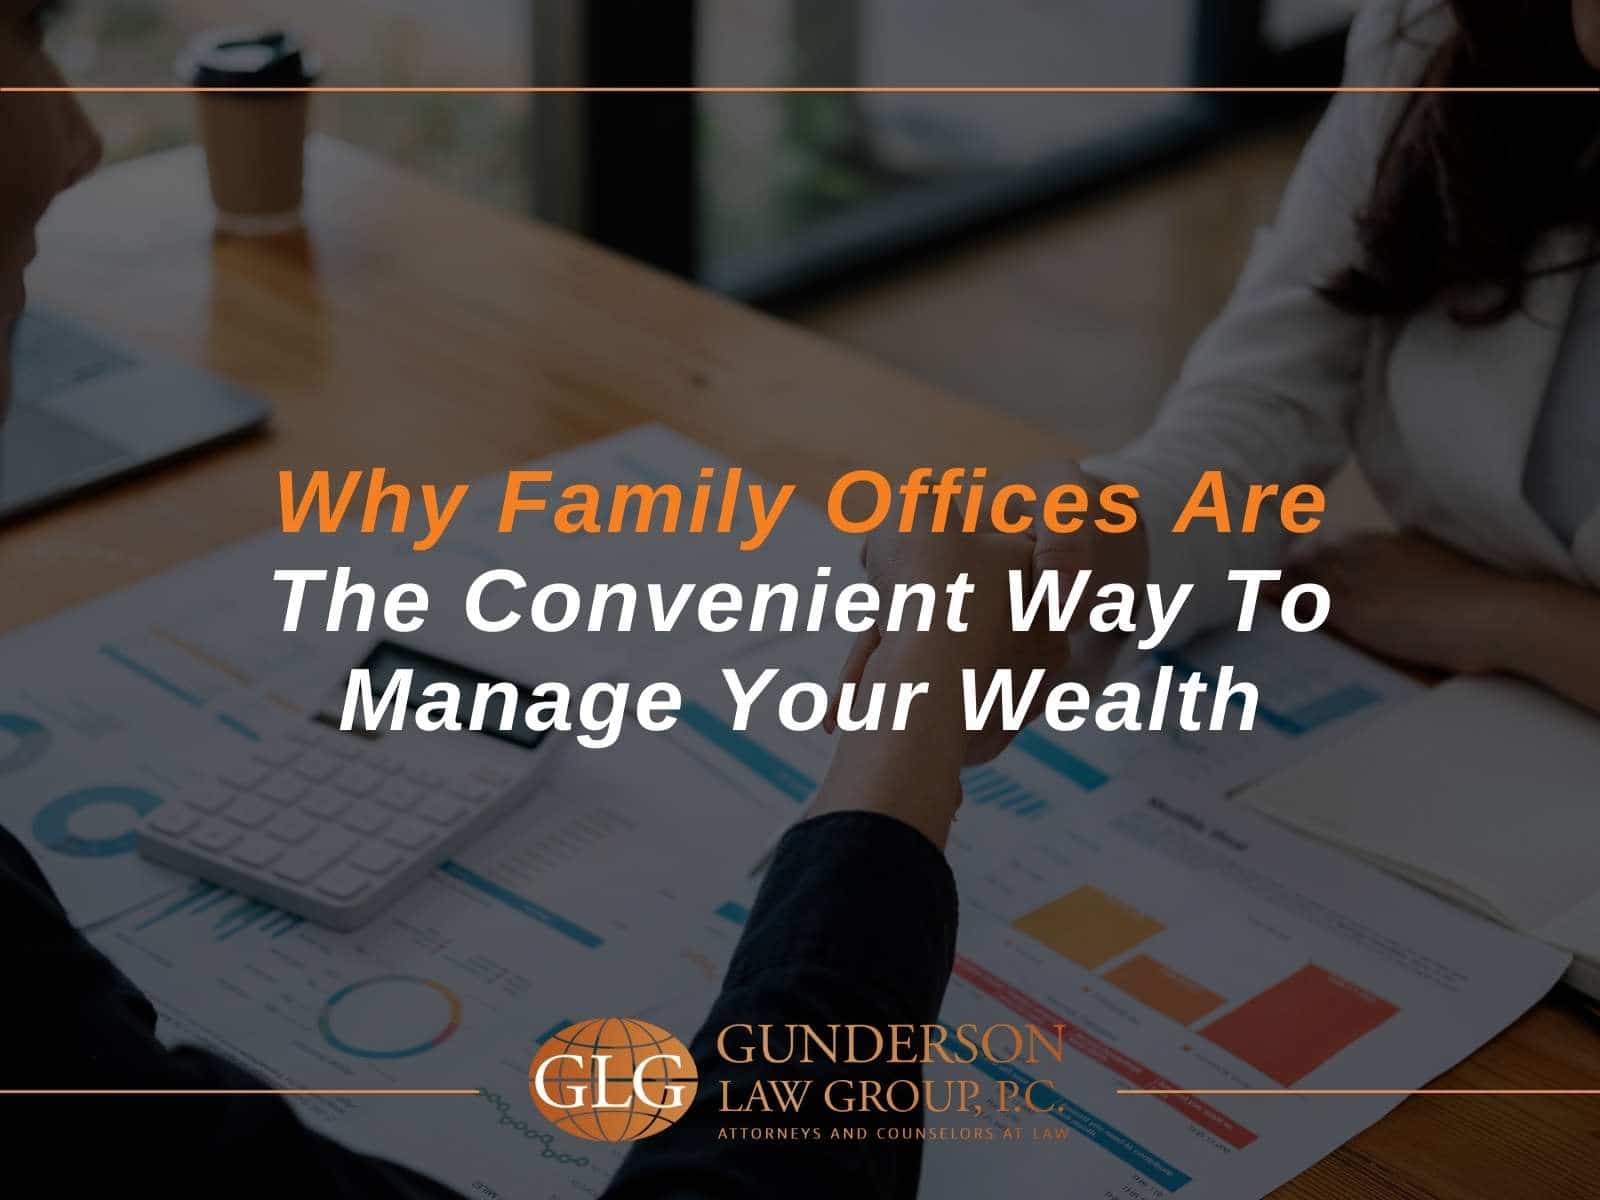 Considering a family office in Arizona